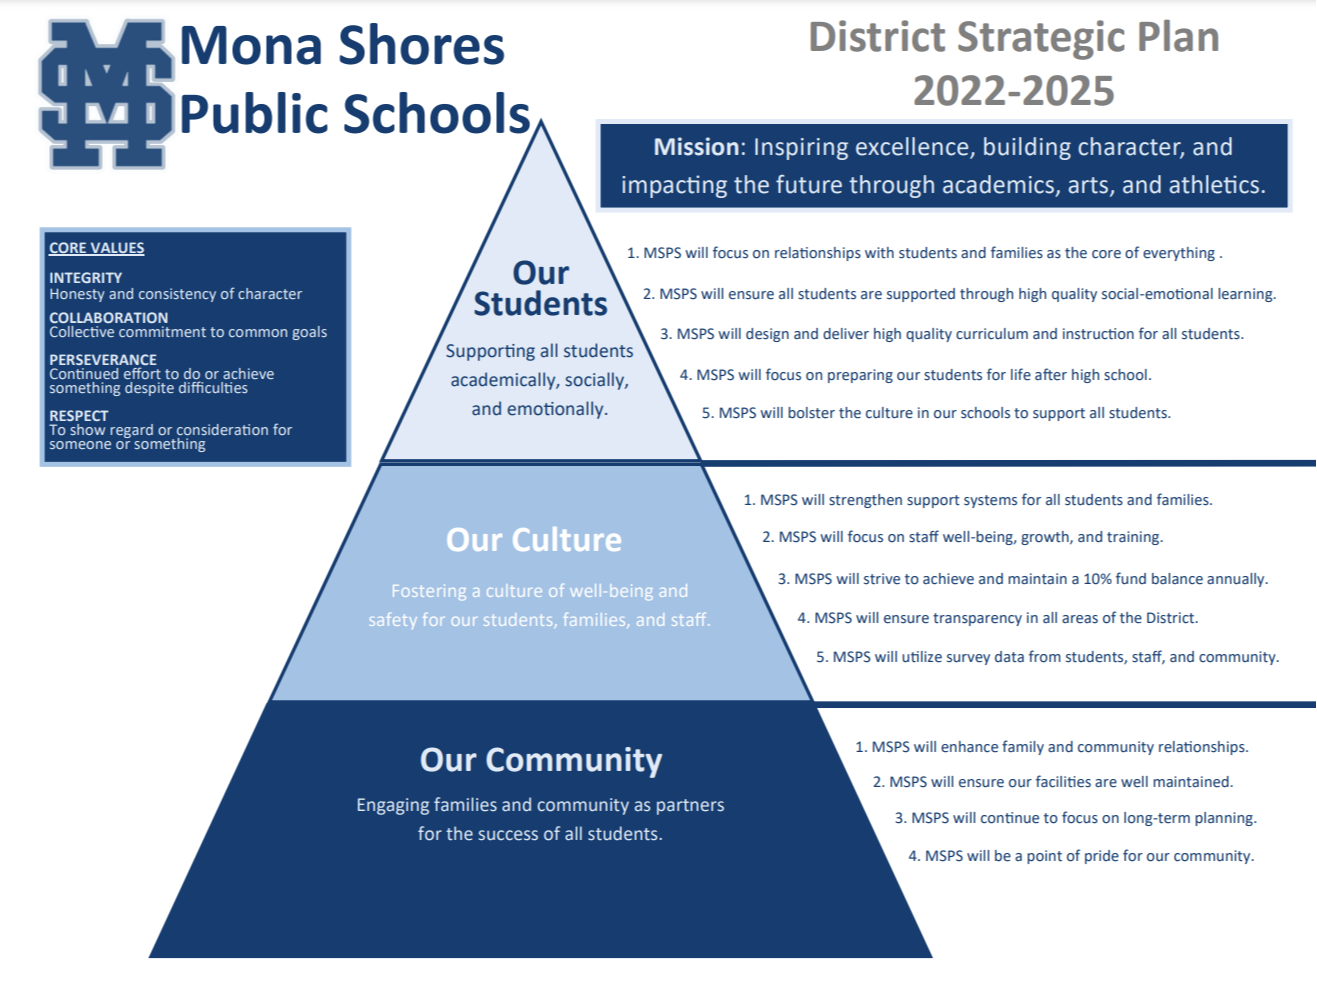 District Strategic Plan from 2022 to 2025